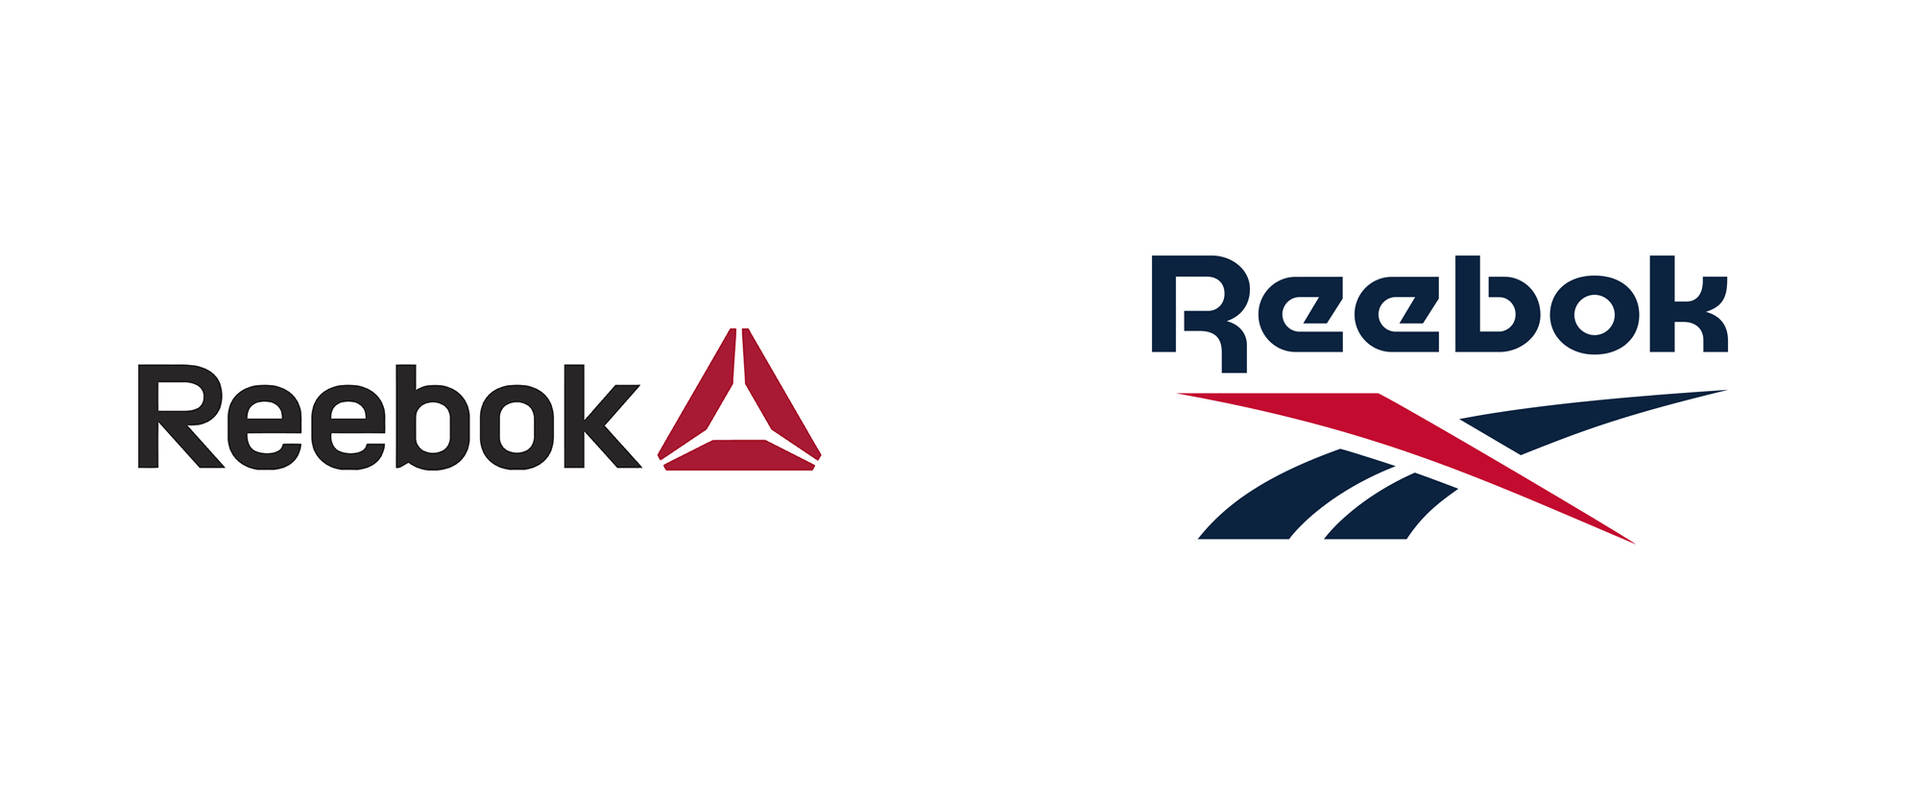 Reebok Old And New Logo Background